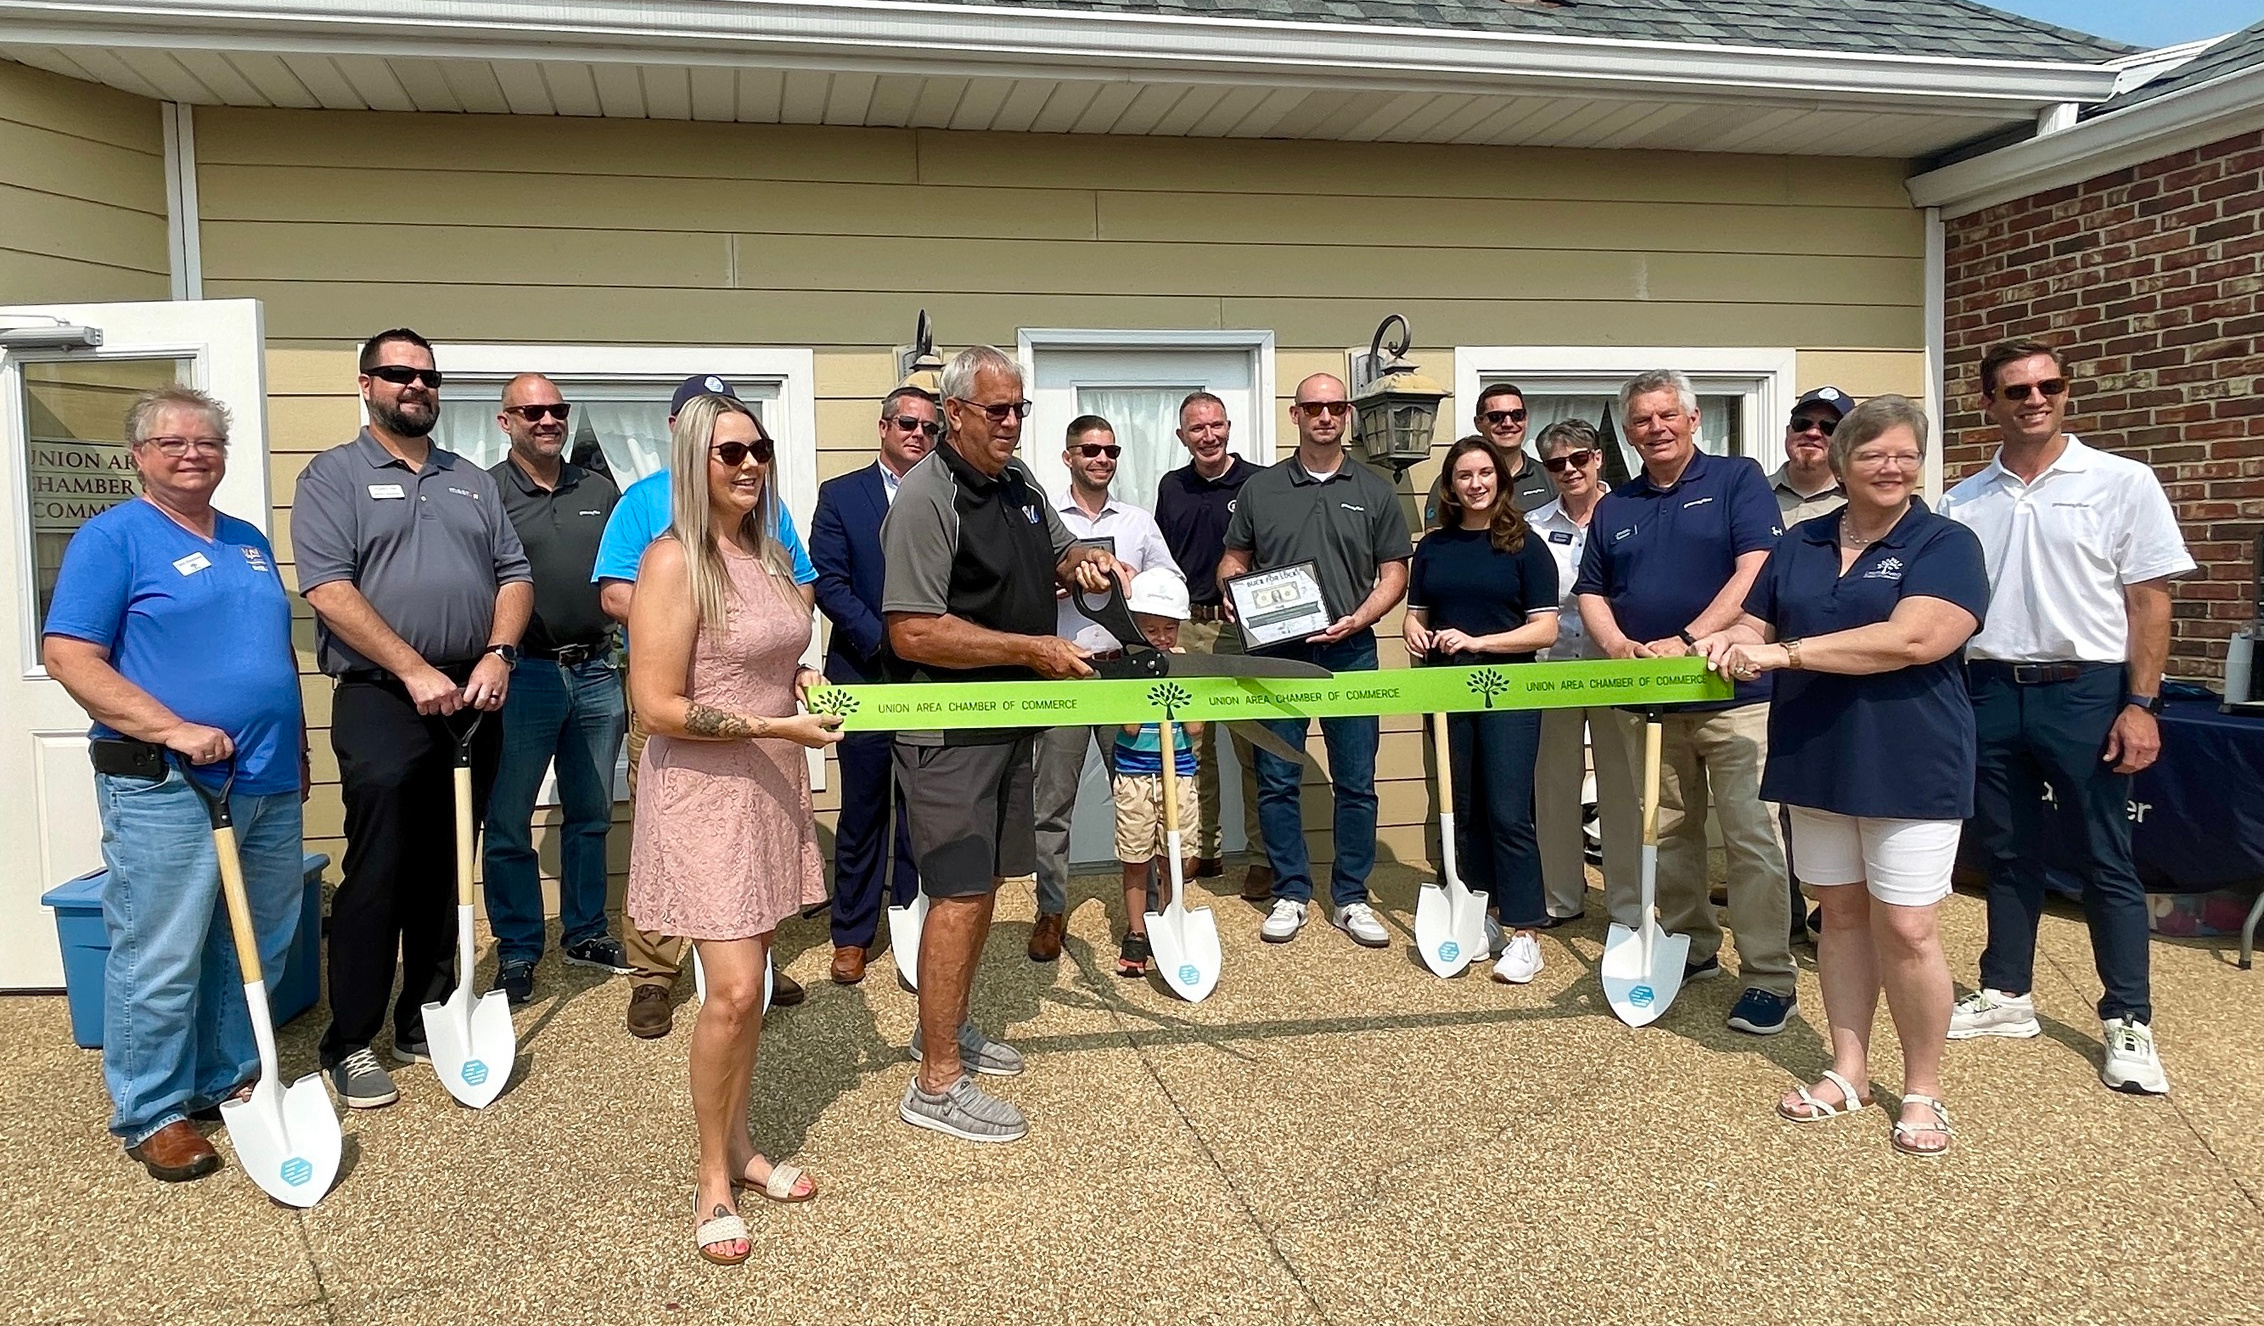 Gateway Fiber broke ground on the new Union market with a ribbon cutting with customers and city and state officials on June 5.